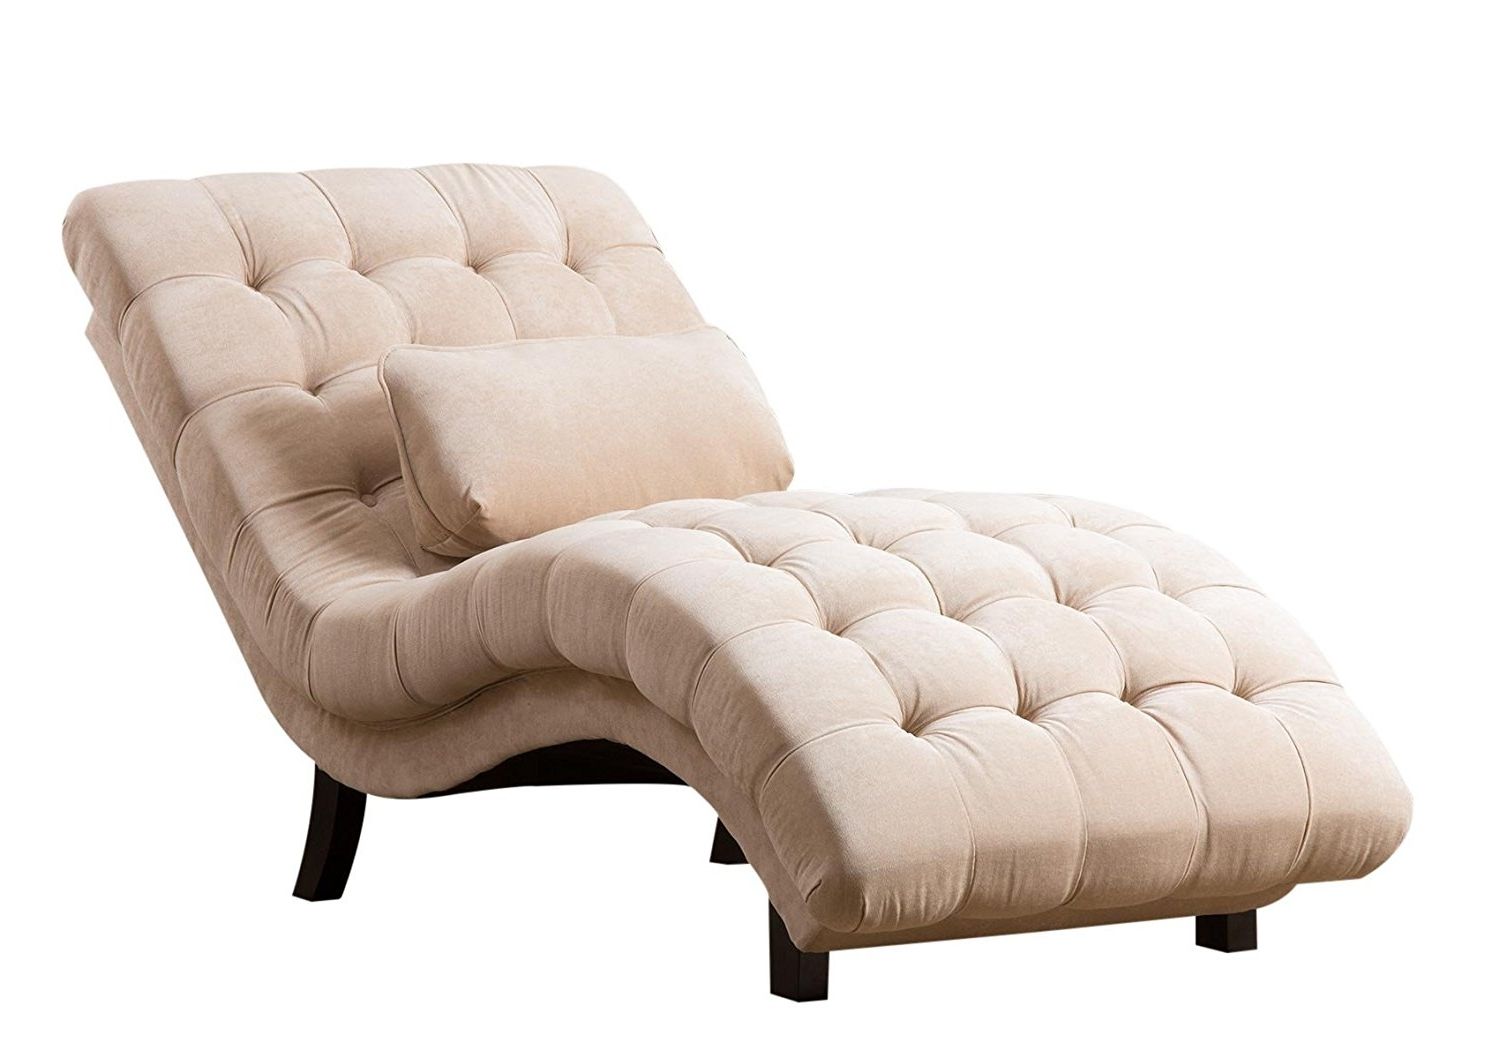 Well Liked Amazon: Abbyson Carmen Cream Fabric Chaise: Home & Kitchen With Regard To Upholstered Chaises (View 5 of 15)